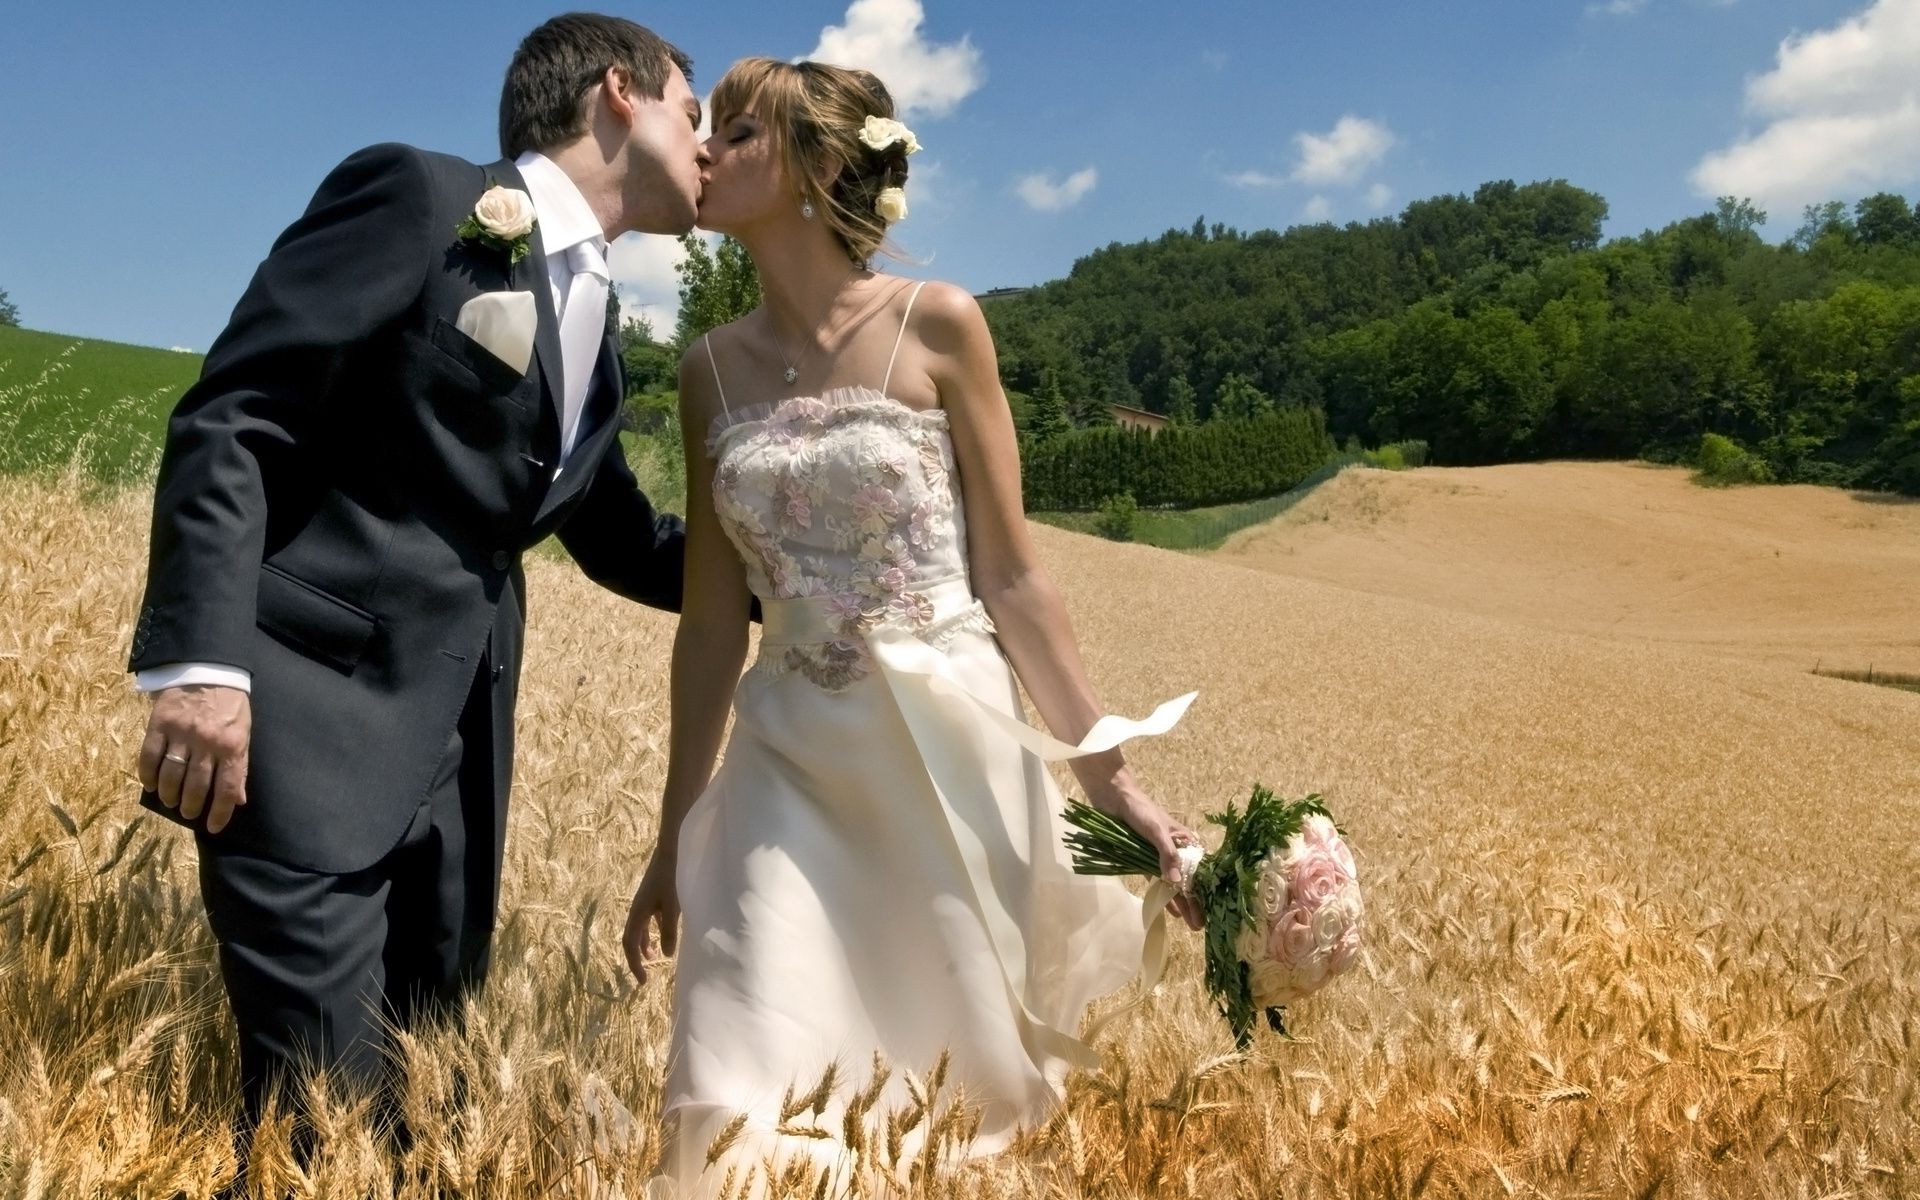 love and romance groom wedding love romance happiness bride dress summer outdoors veil couple nature togetherness joy woman wheat two adult grass